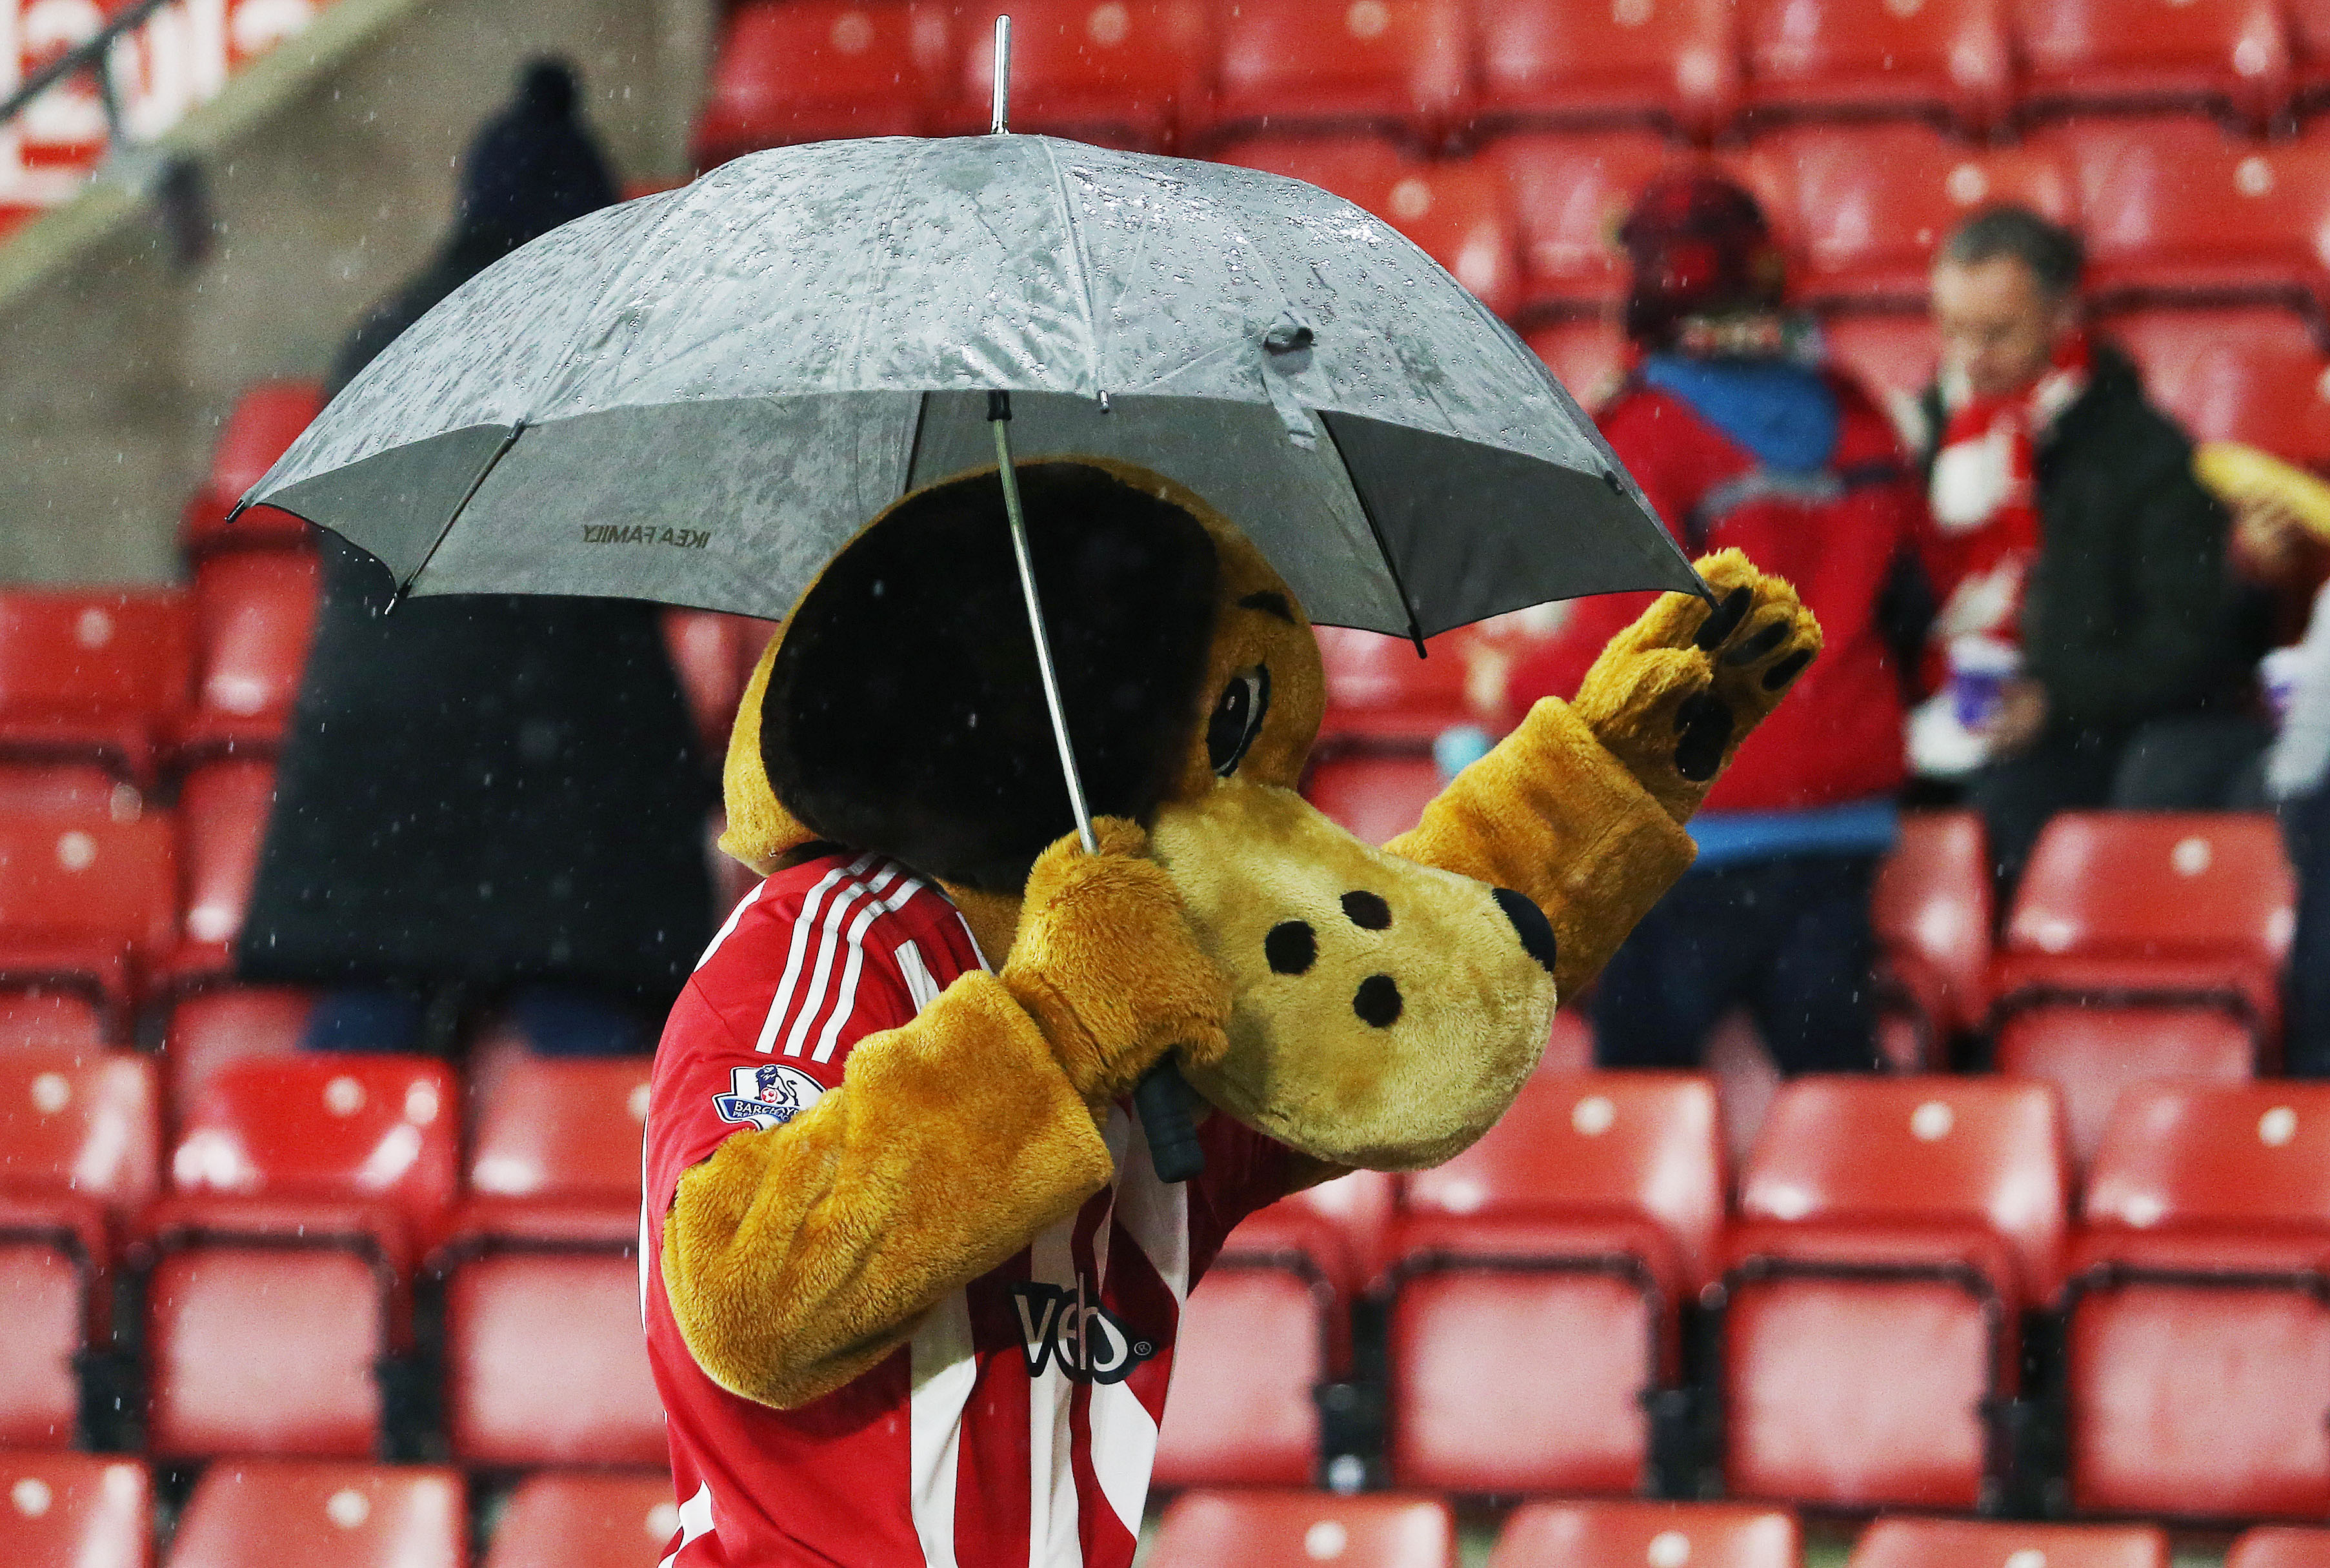 The Southampton mascot shelters under an umbrella in poor conditions